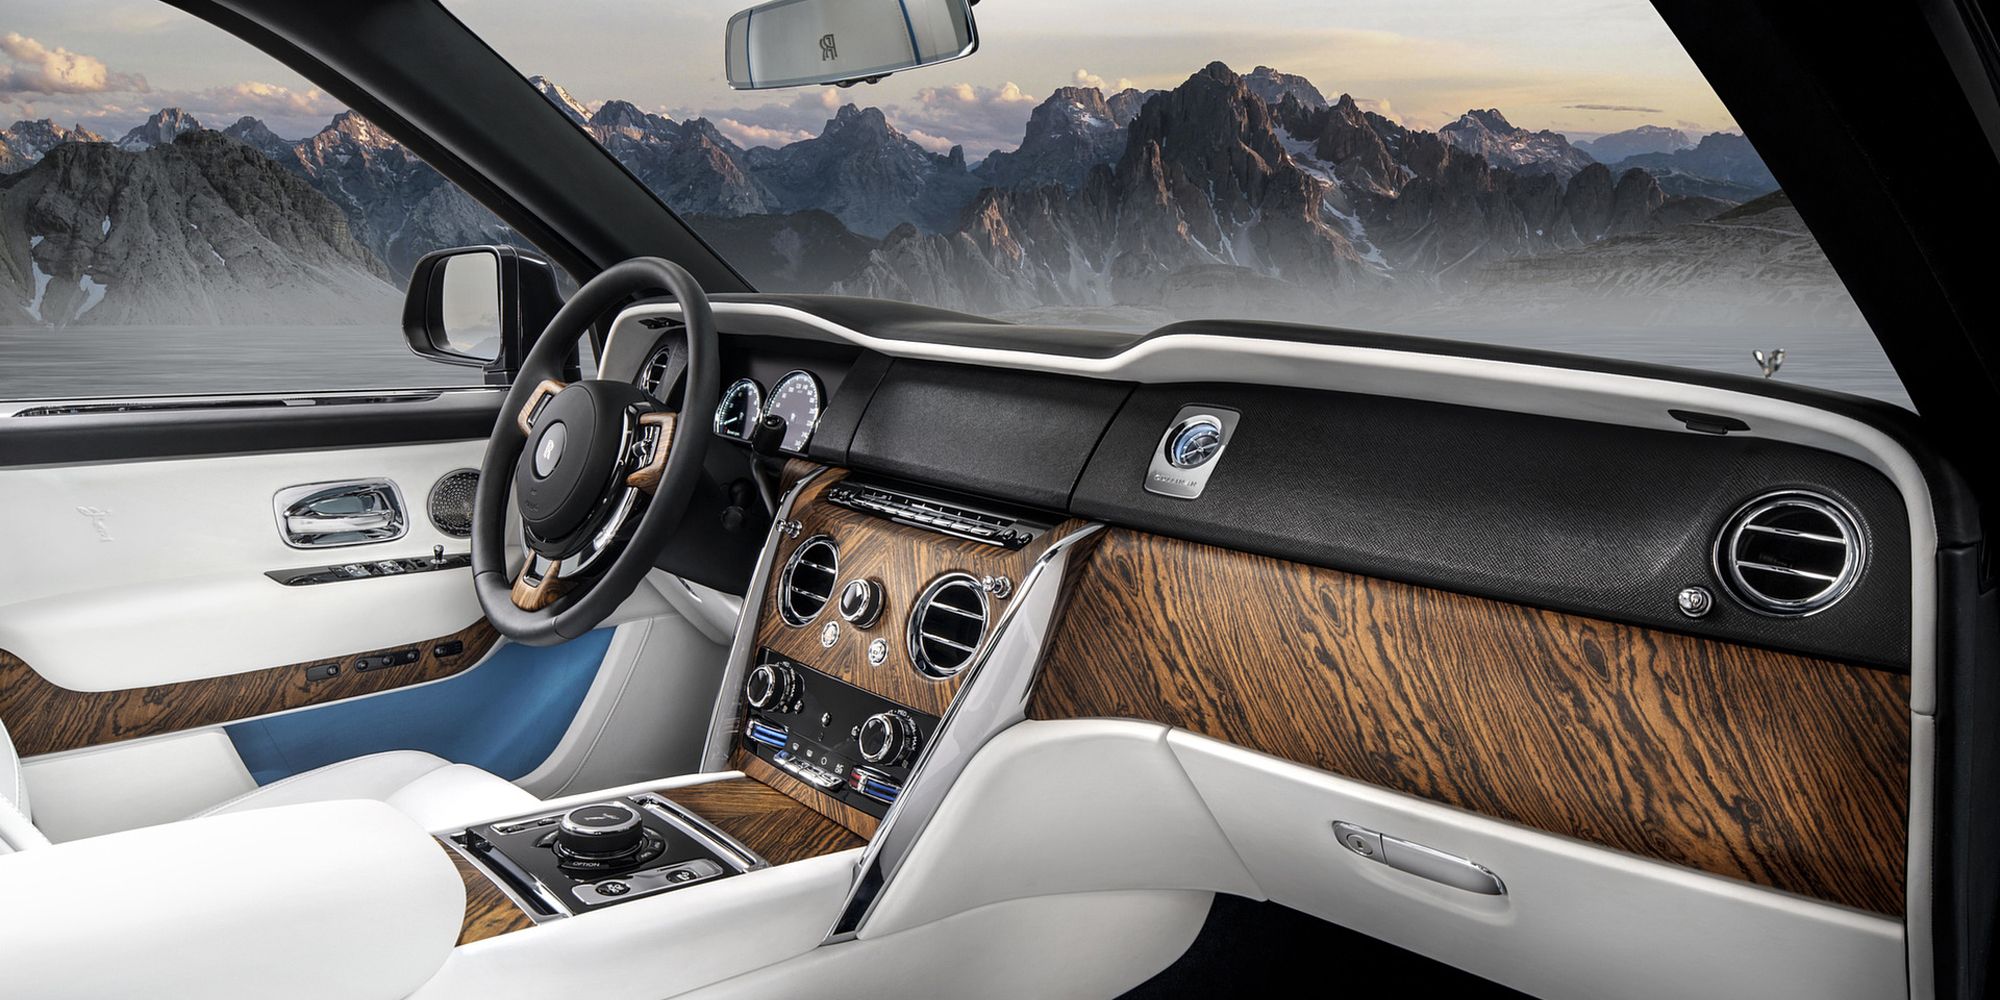 The interior of the Cullinan, finished in white and blue